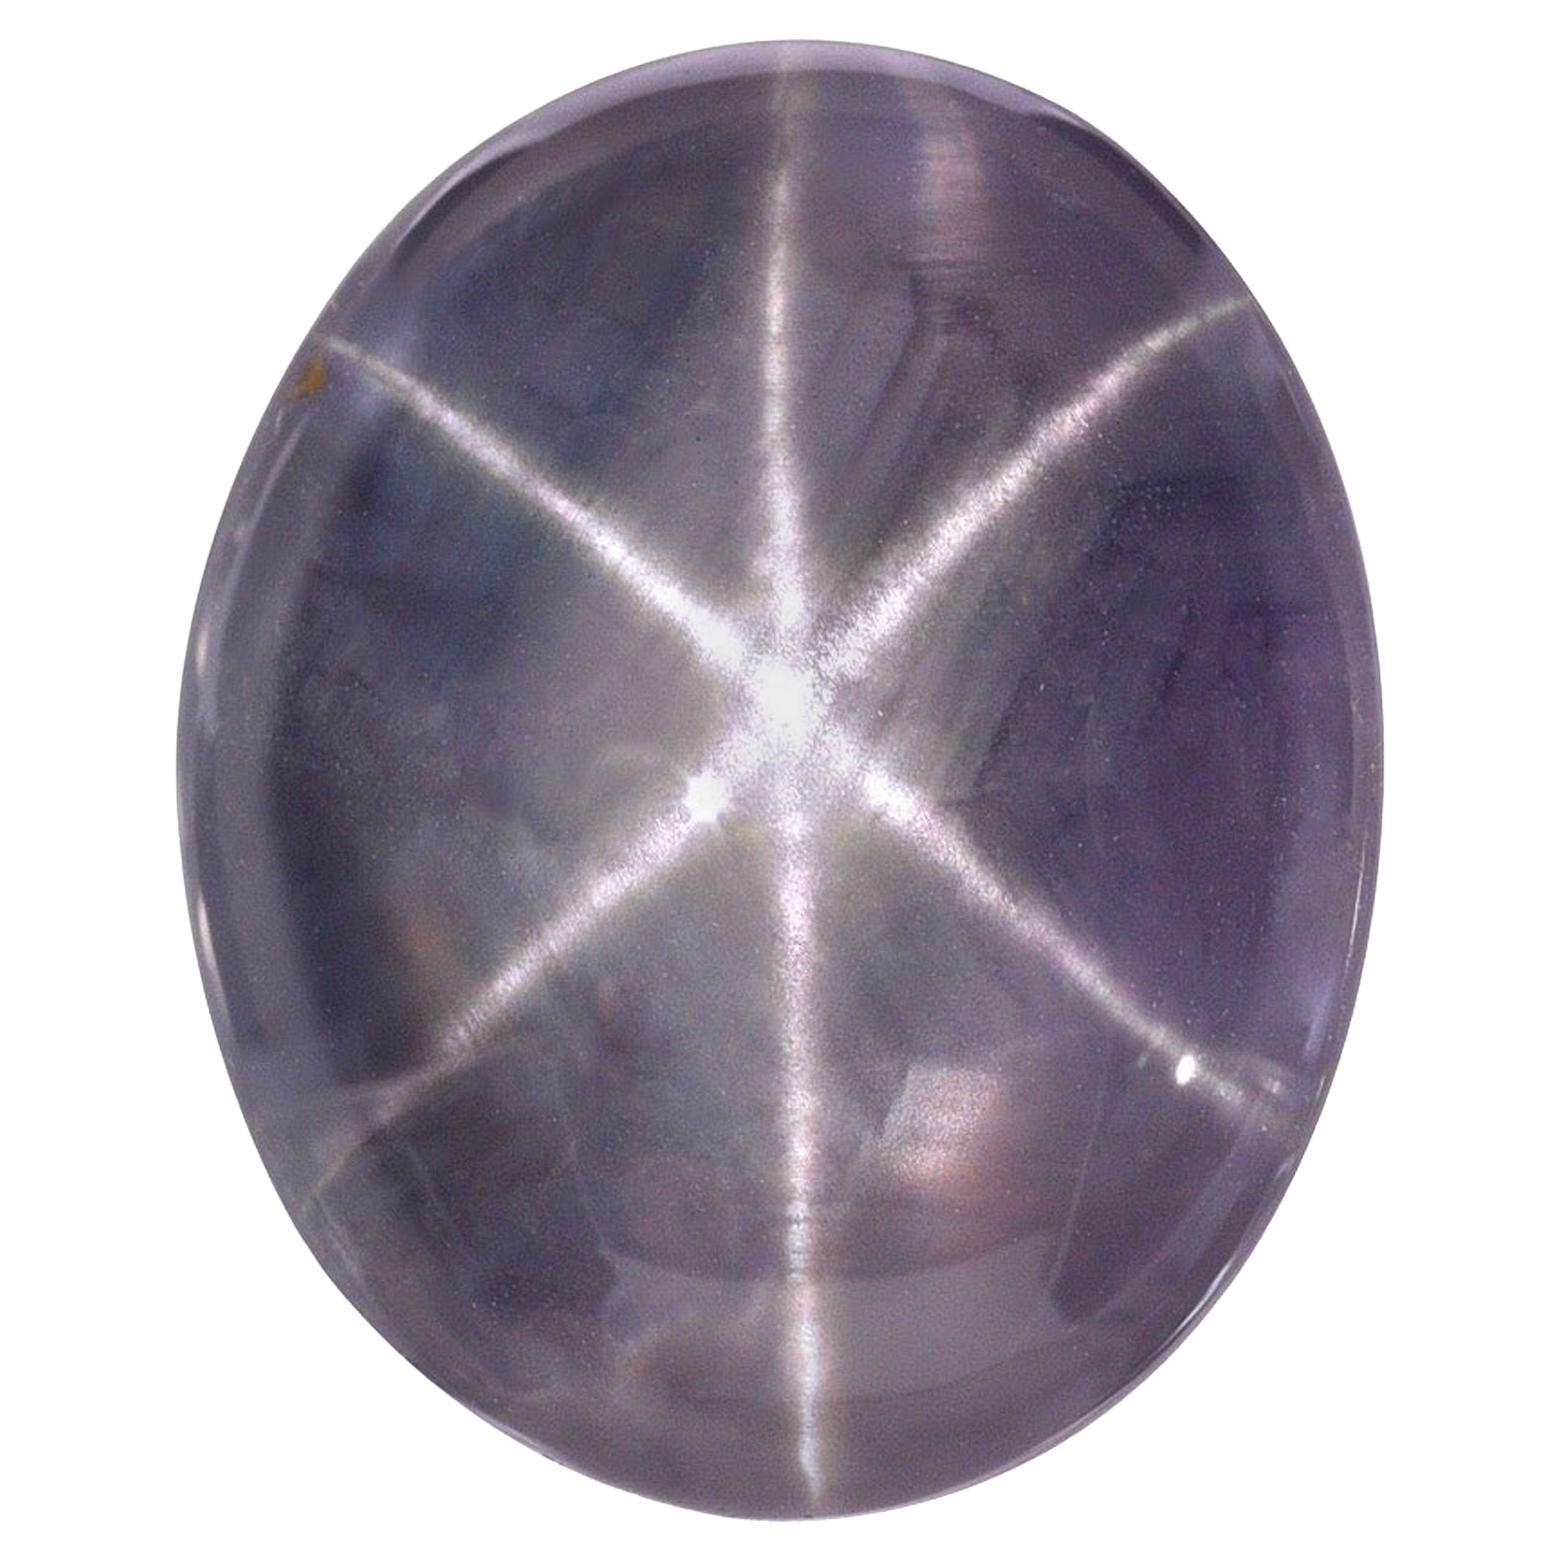 Unheated 12.74 carat bluish grey Star Sapphire gem, offered loose to a classy lady or gentleman.
Returns are accepted and paid by us within 7 days of delivery.
All images are magnified to provide you with closer detail. This gem is clean to the